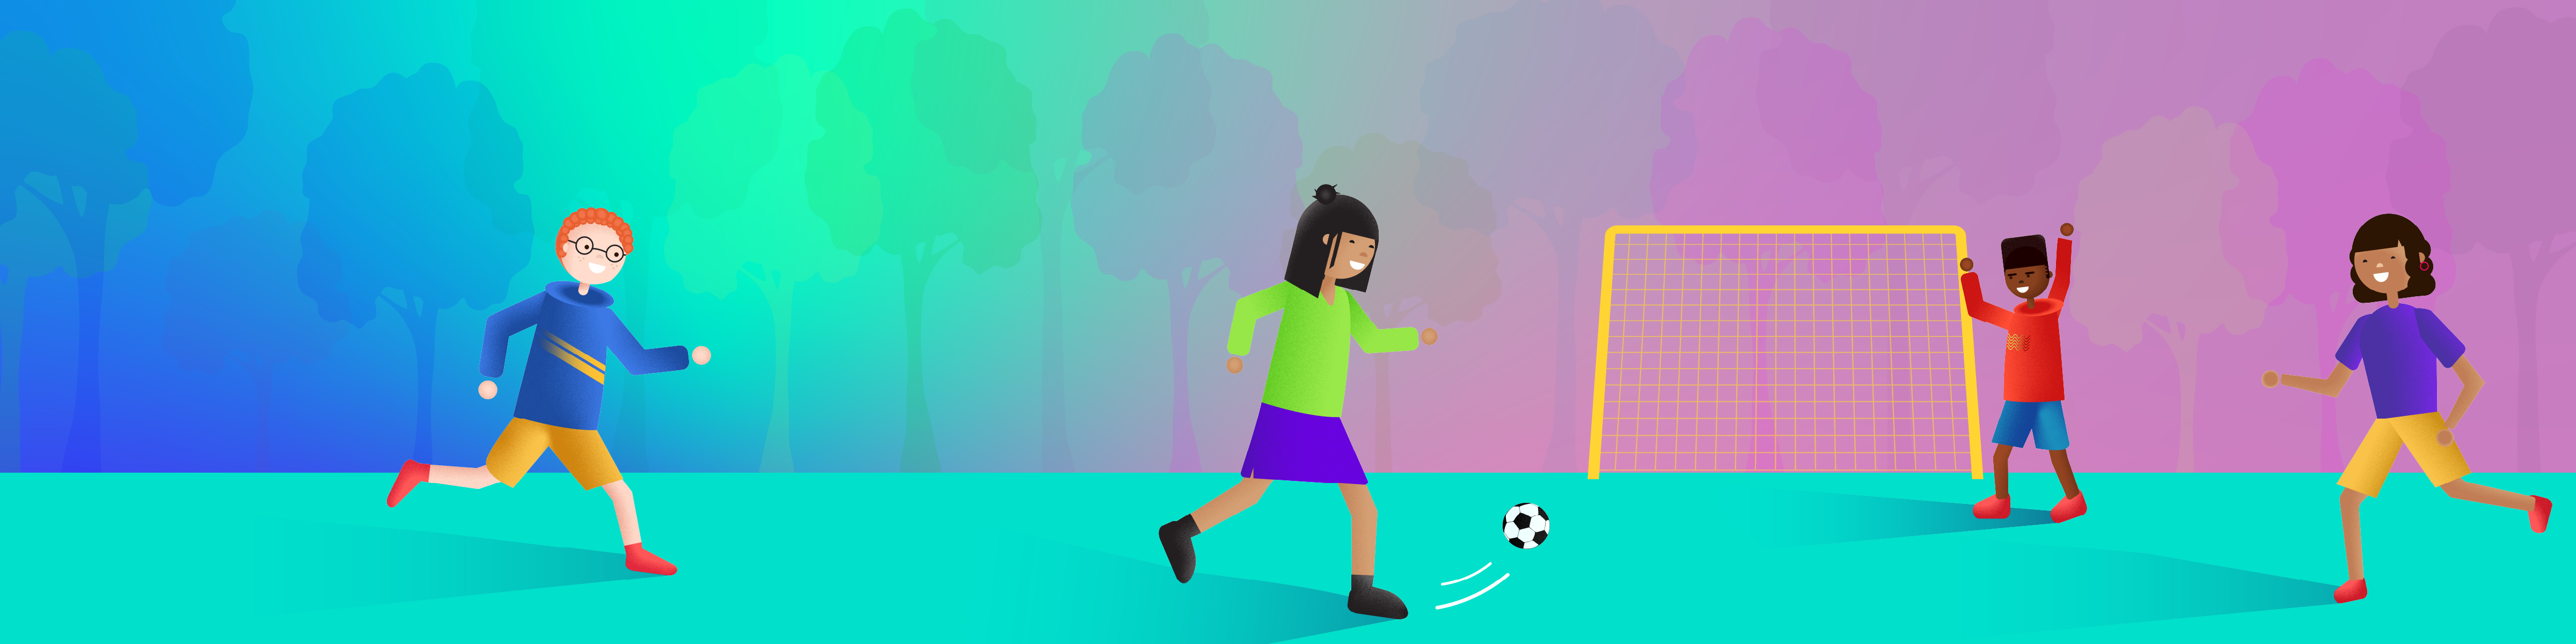 image of four children playing soccer